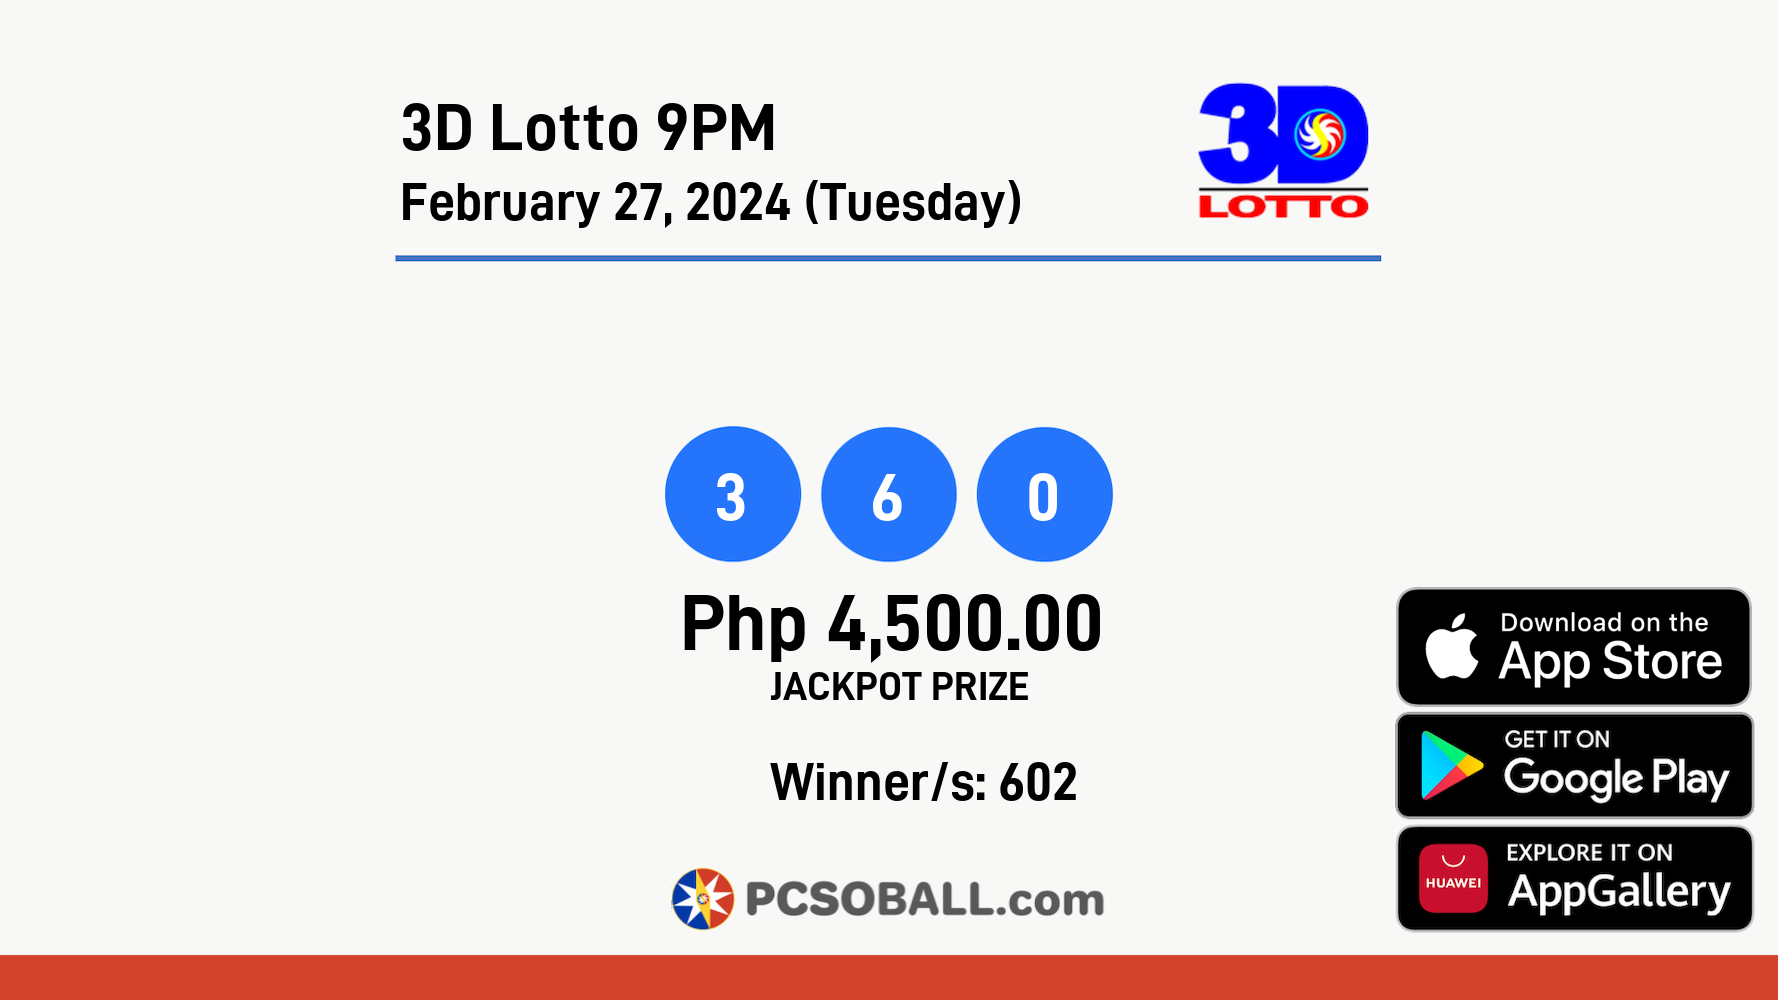 3D Lotto 9PM February 27, 2024 (Tuesday) Result